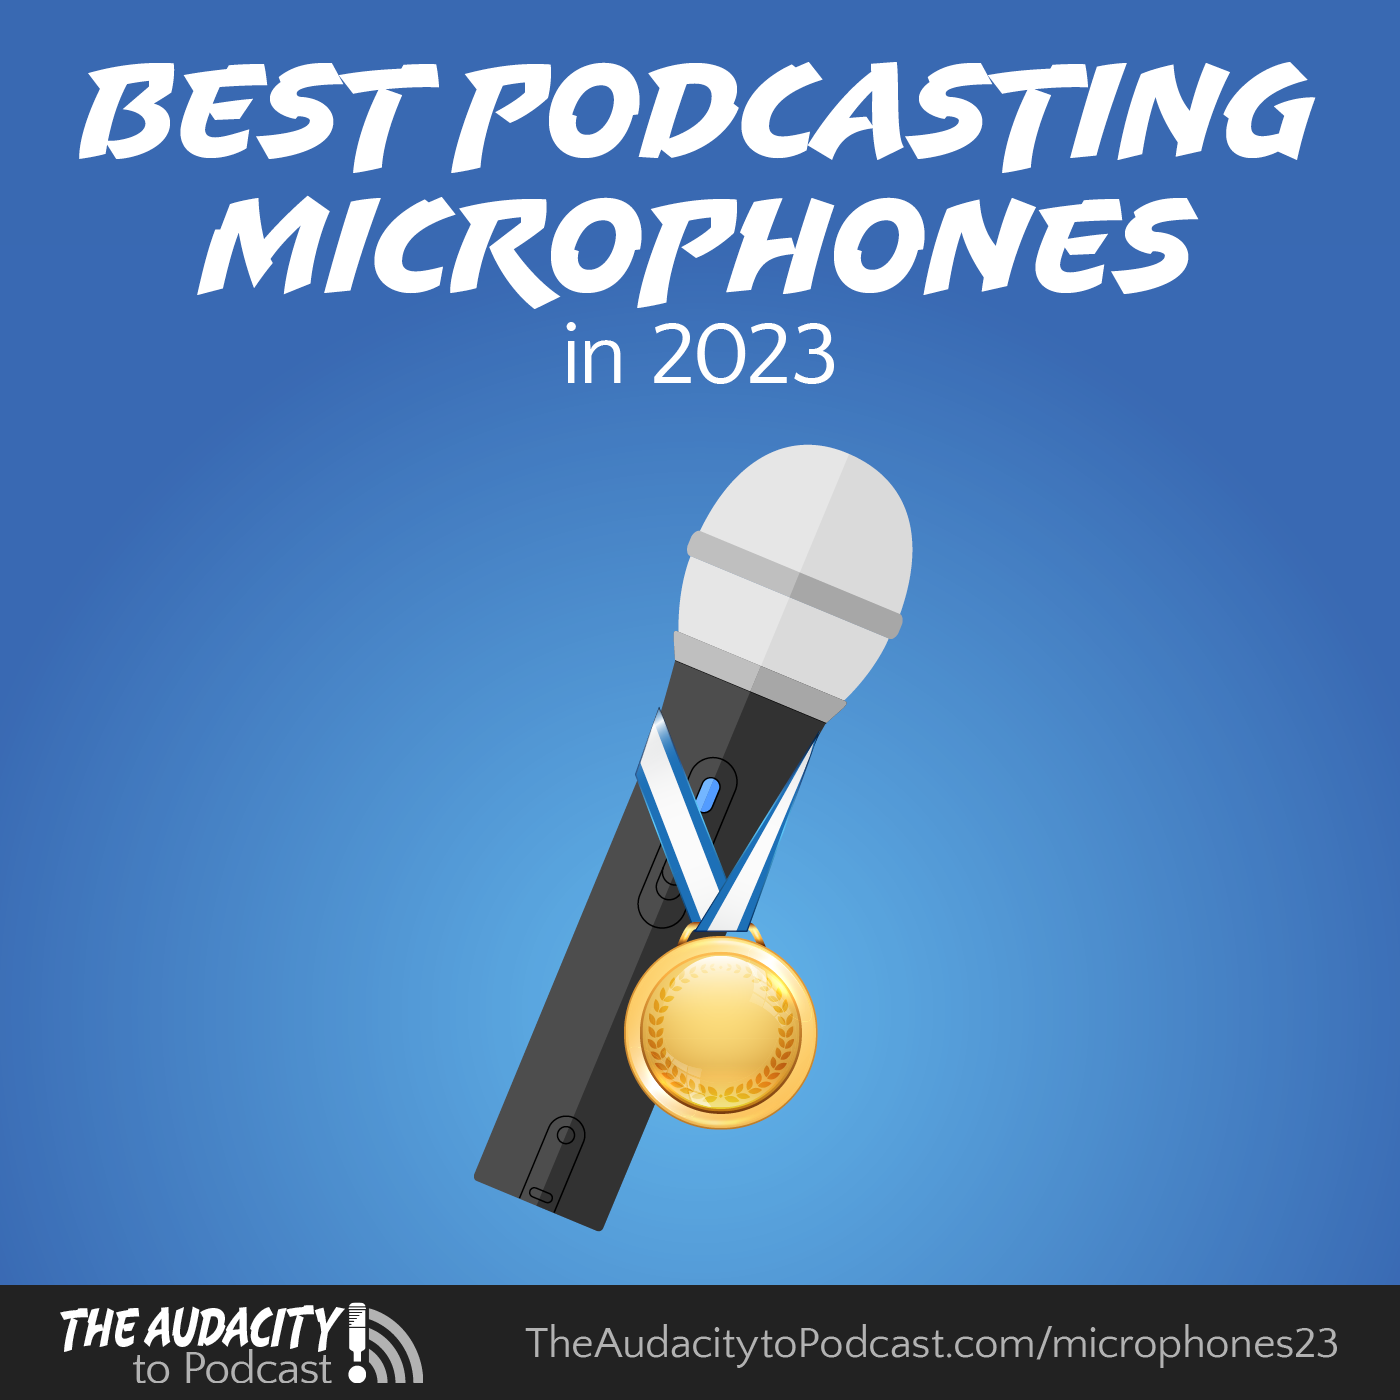 Best Podcasting Microphones in 2023